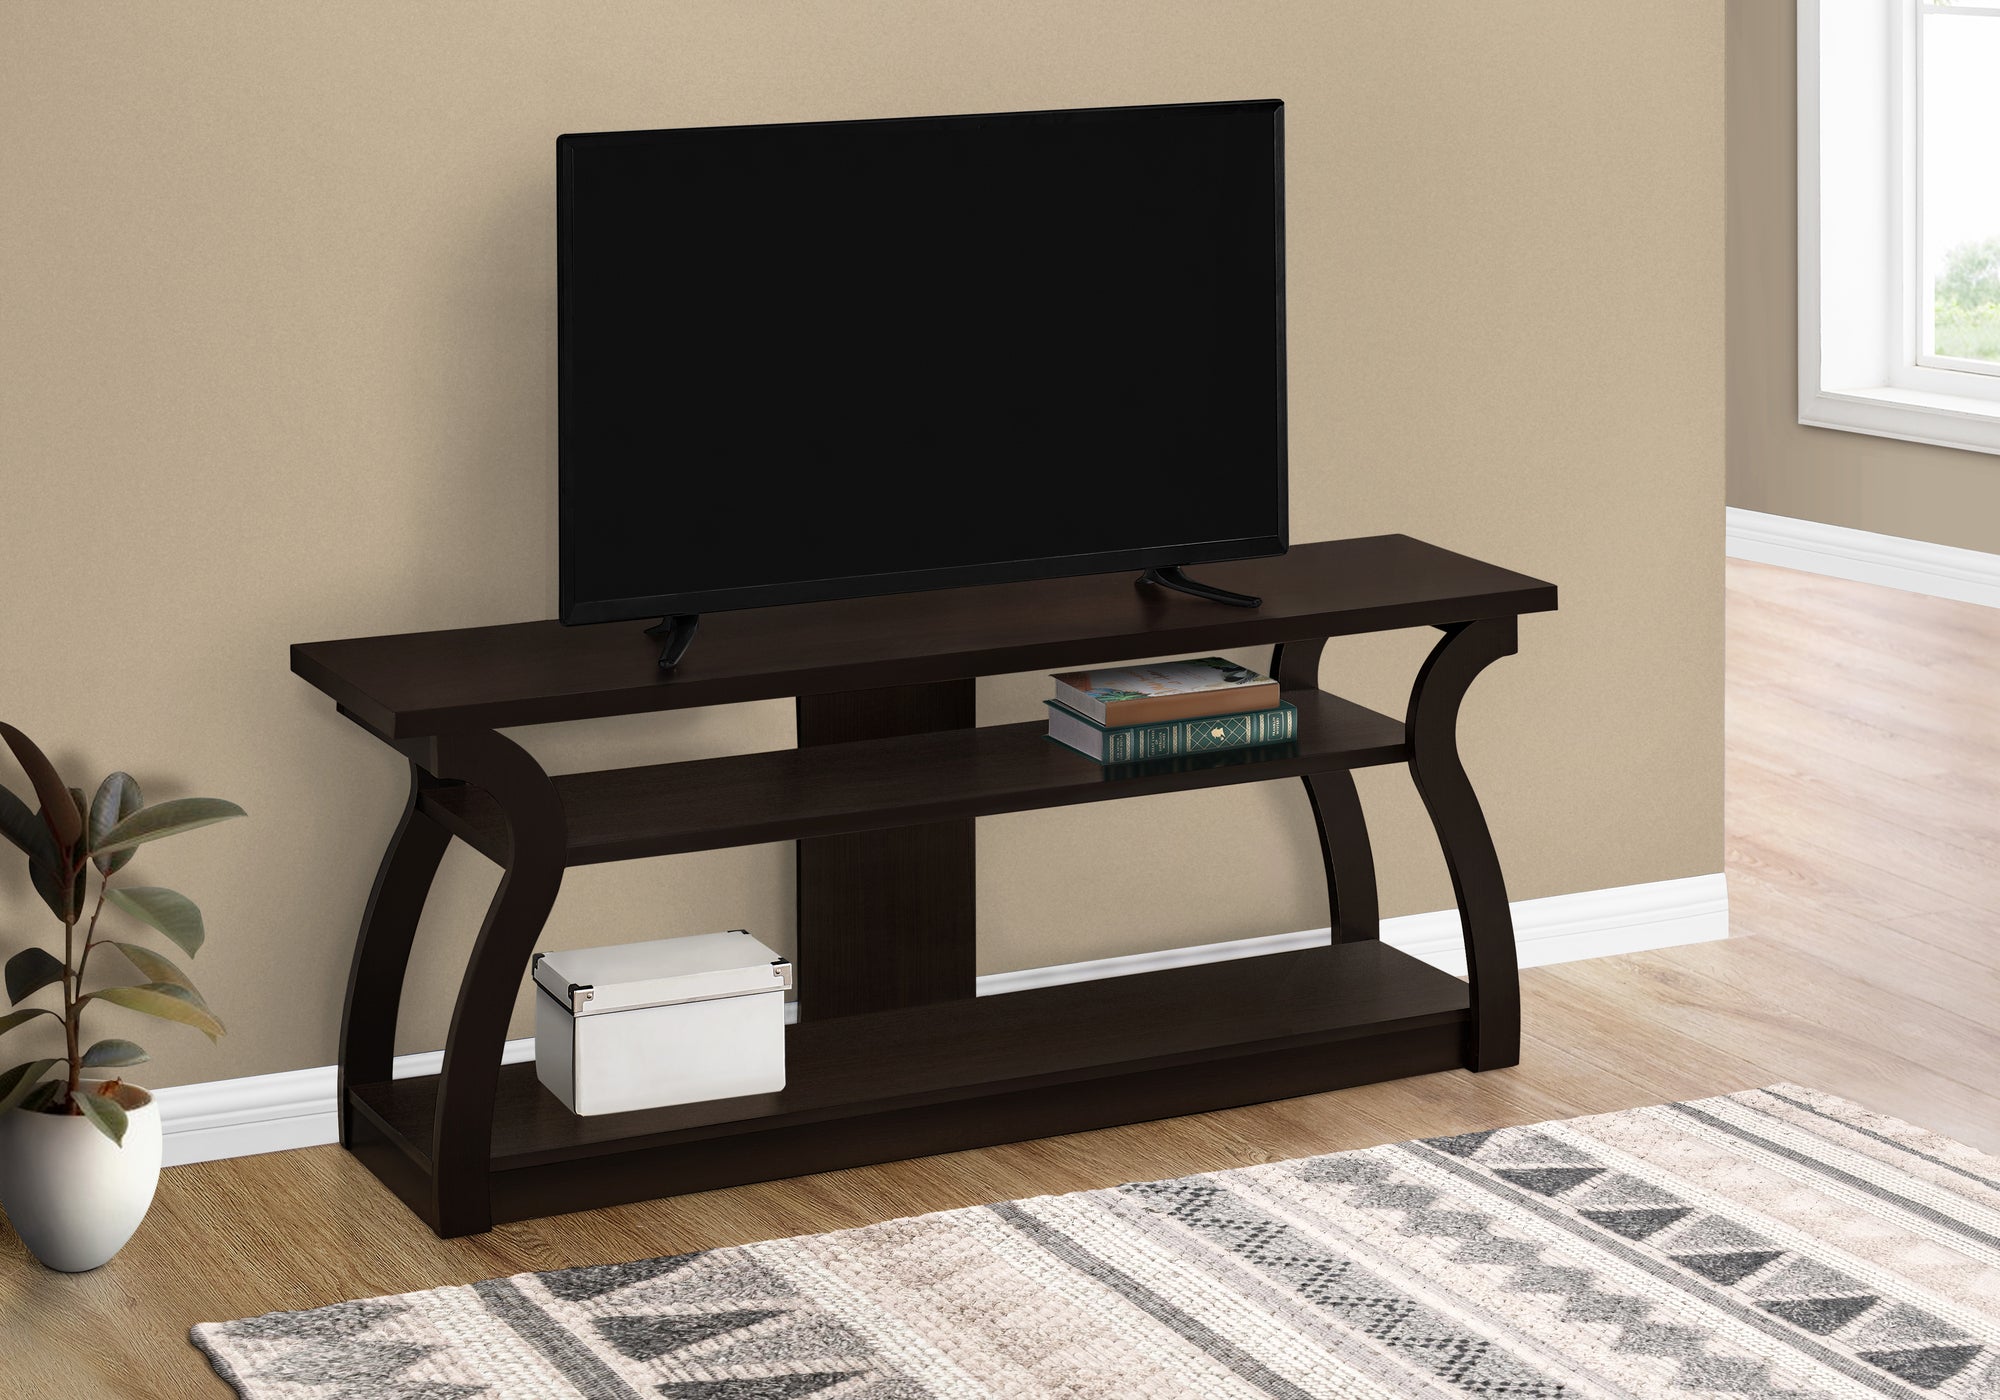 MN-892667    Tv Stand, 60 Inch, Console, Media Entertainment Center, Storage Cabinet, Living Room, Bedroom, Laminate, Dark Brown, Contemporary, Modern